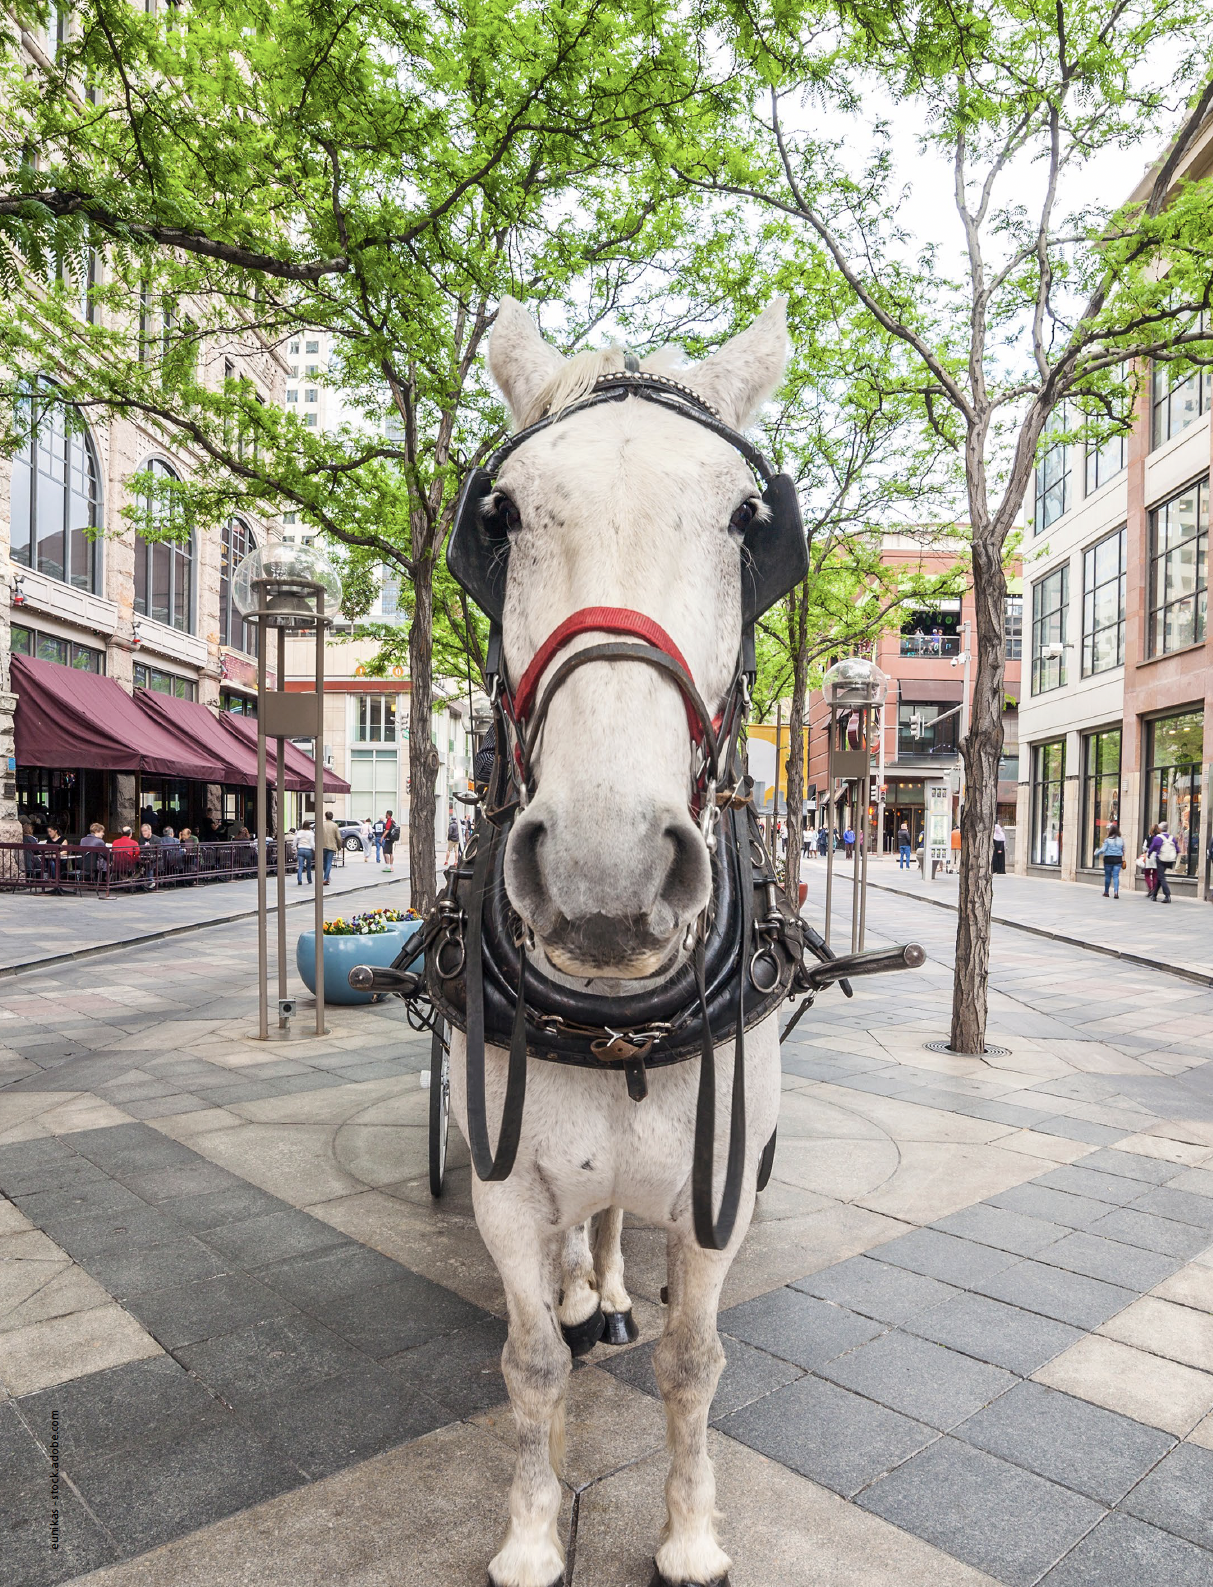 A horse and carriage on the promenade in Denver, Colorado, where the 2024 HPLC conference will take place. | Image Credit: © eunikas - stock.adobe.com